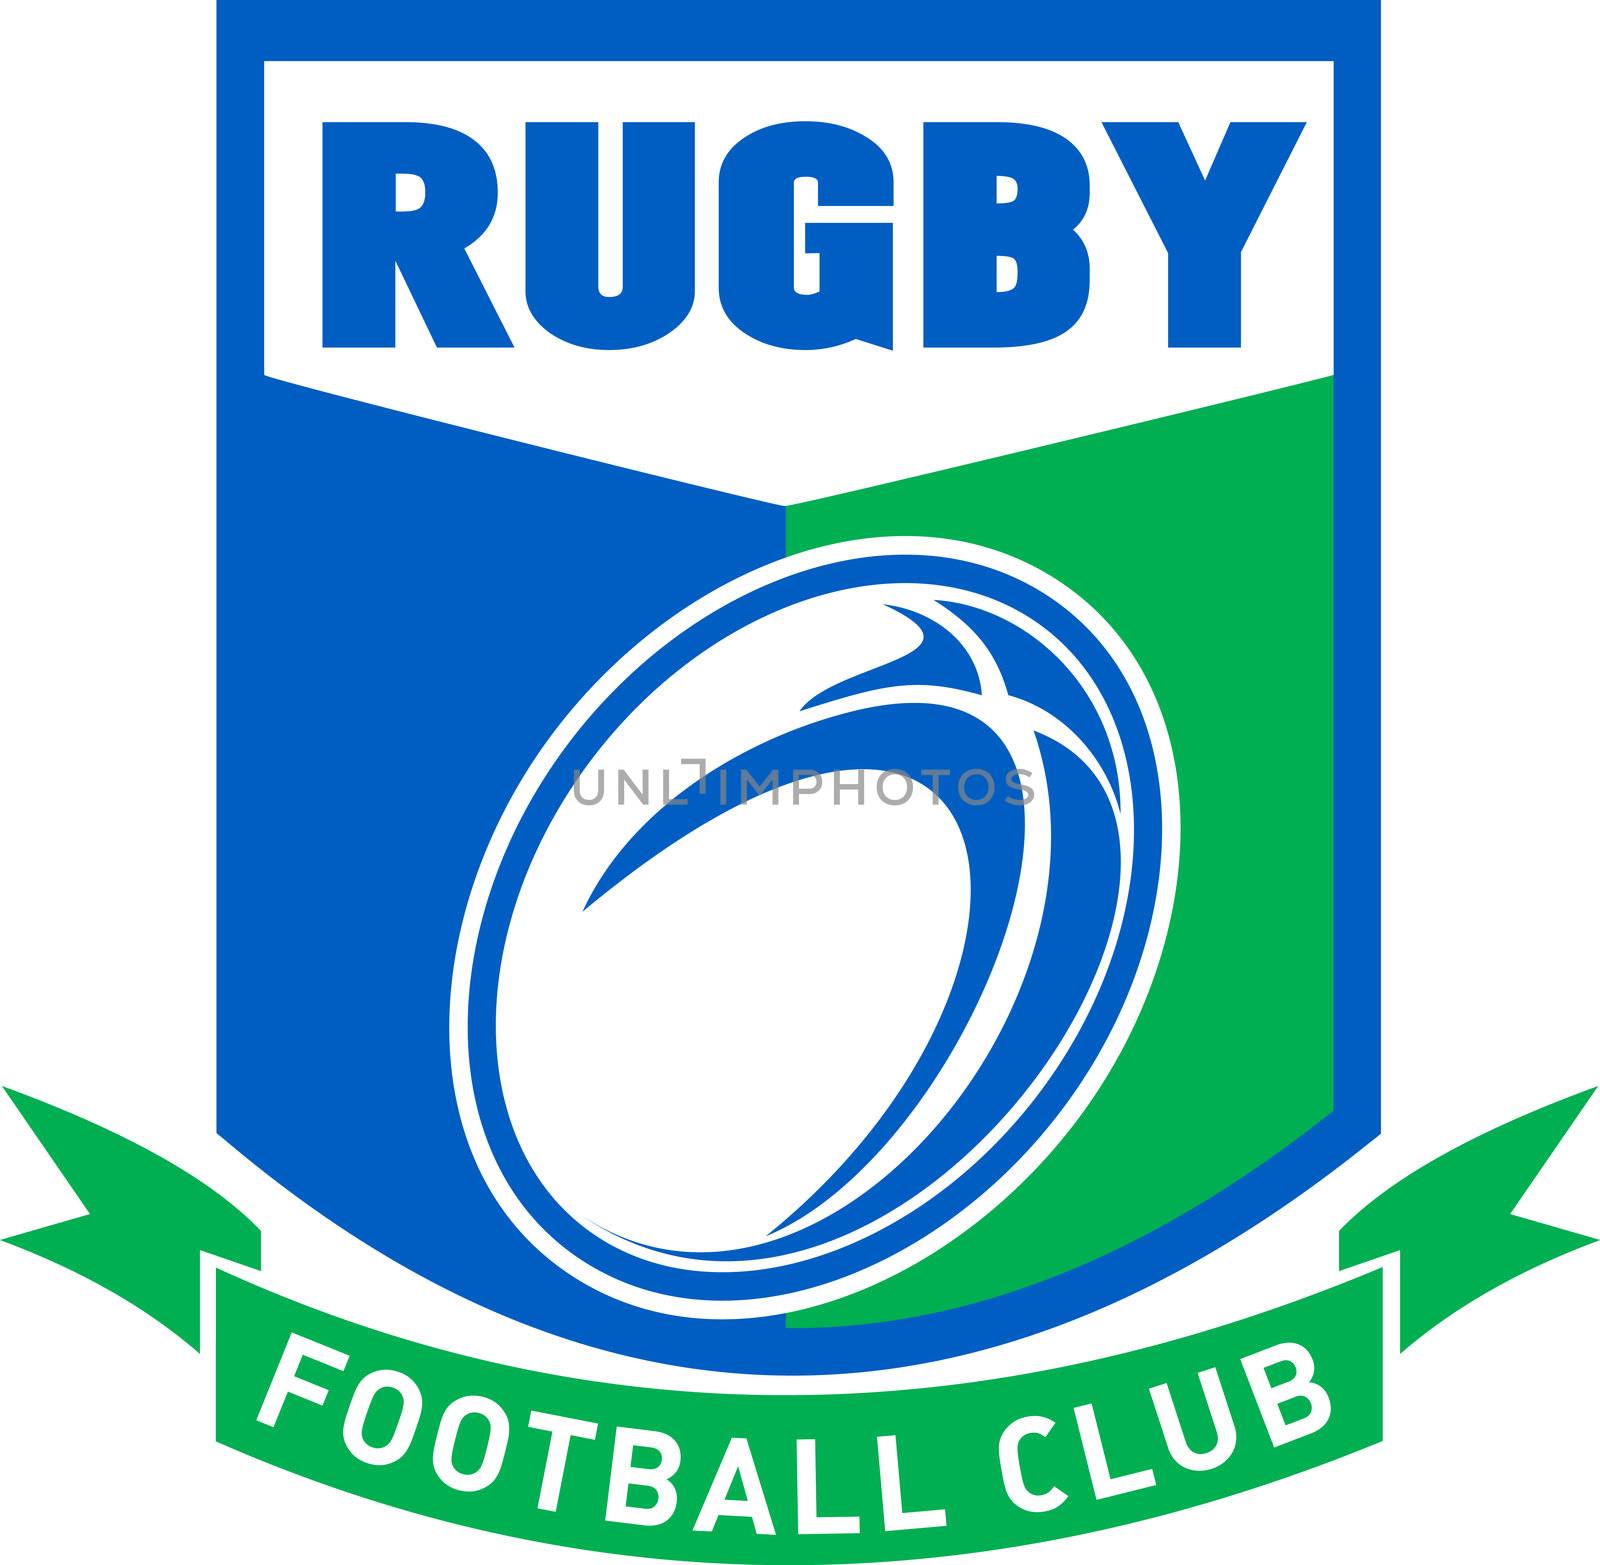 illustration of a rugby ball set inside shield with ribbon scroll and words "rugby football club"